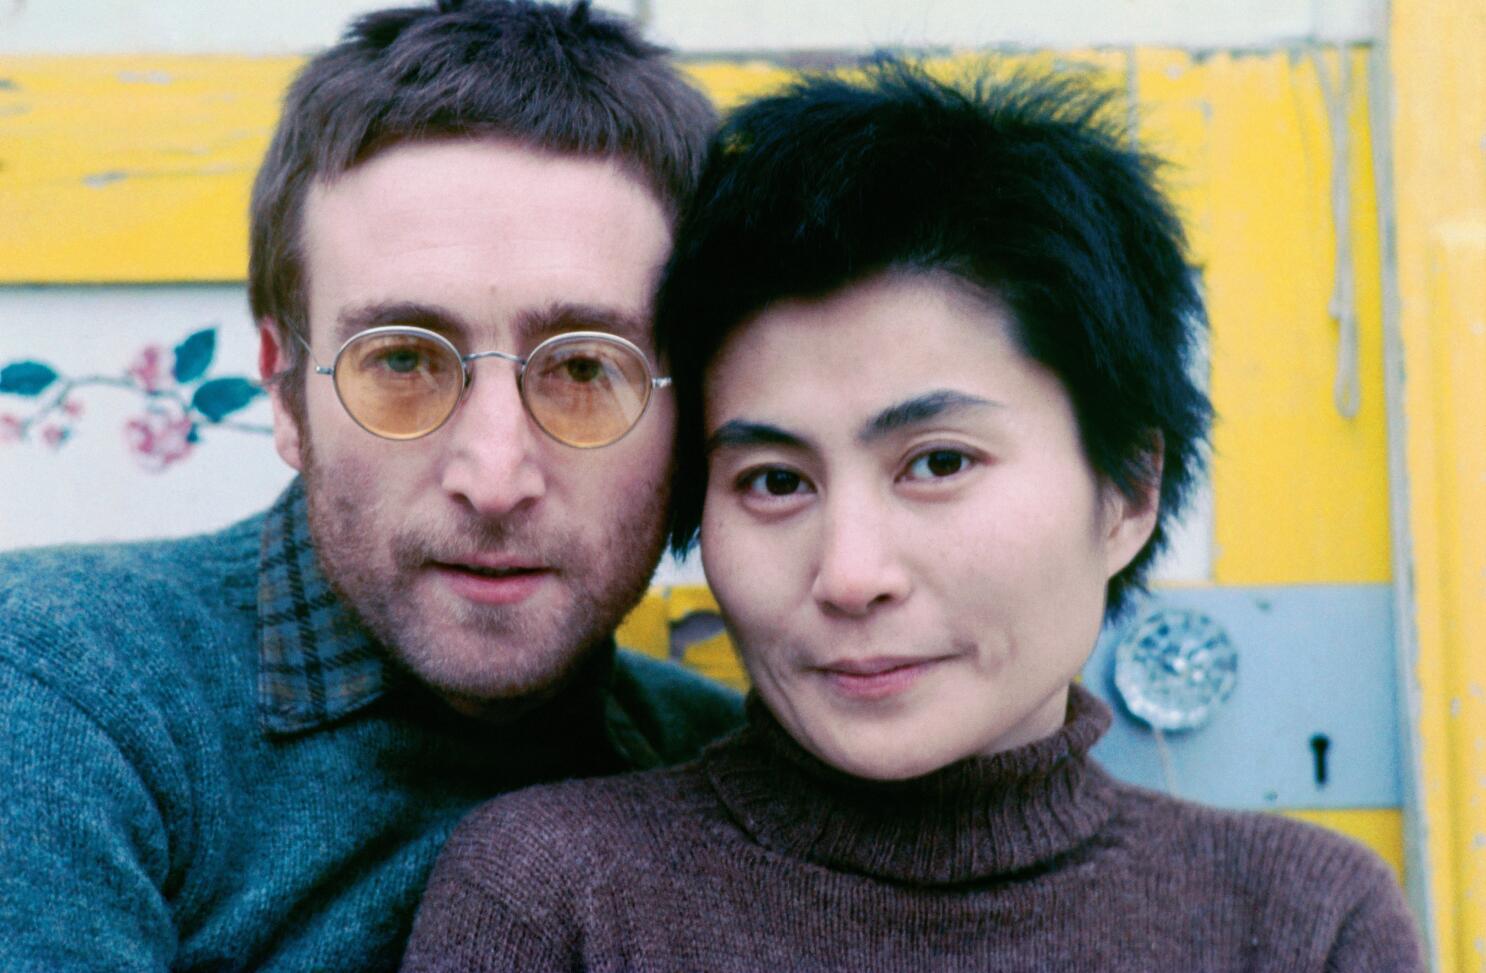 The real story behind 'John Lennon / Plastic Ono Band' album - Los